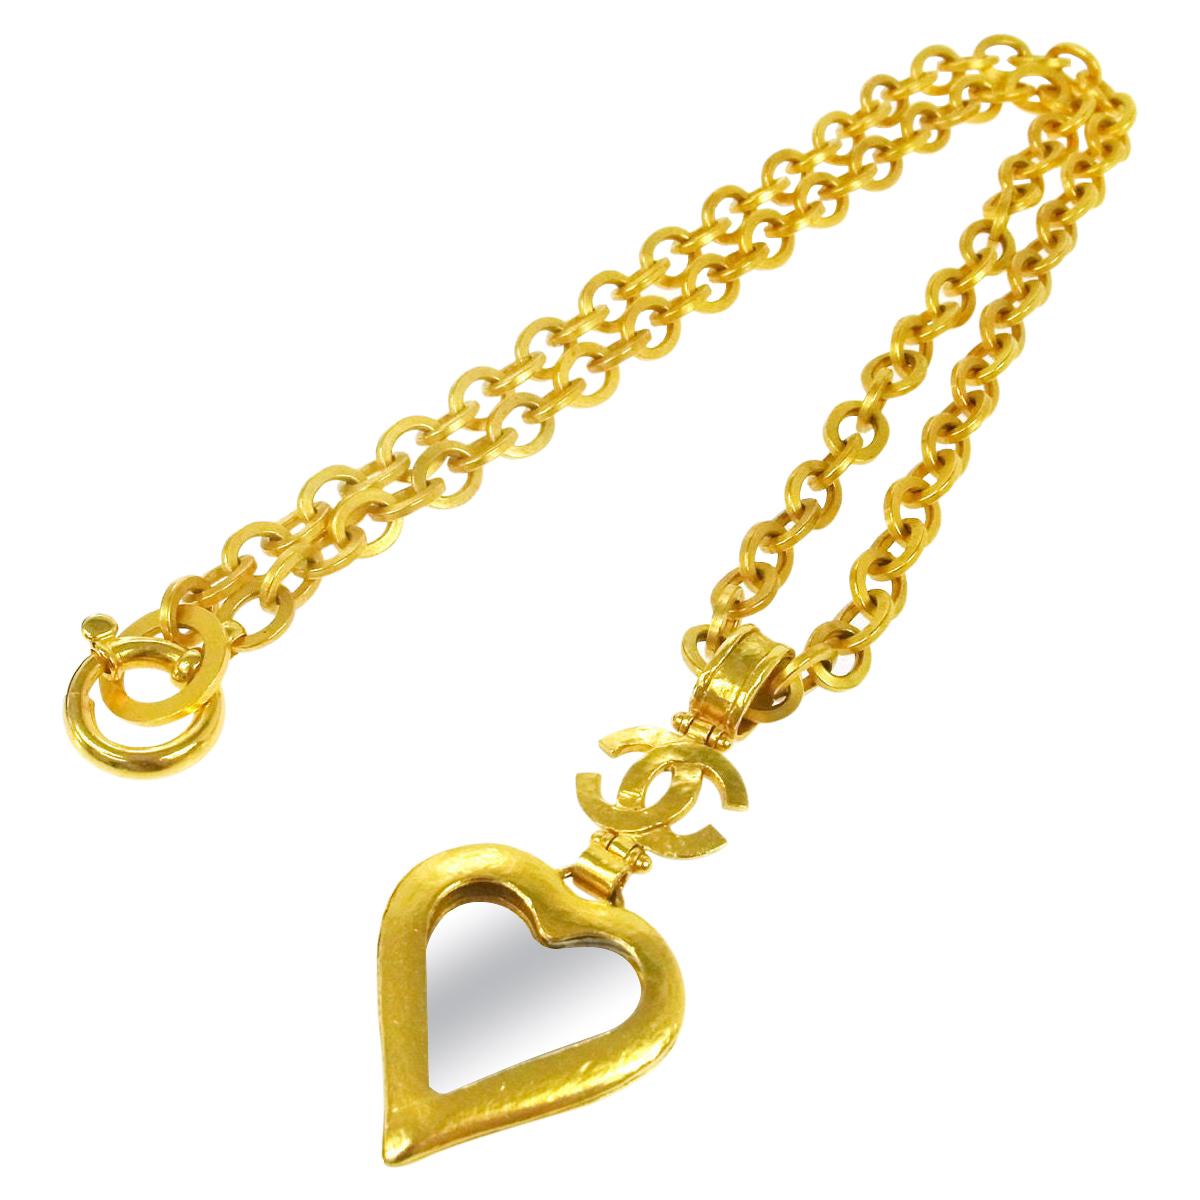 Chanel Gold Heart Mirror Detail Evening Pendant Charm Long Link Necklace in Box